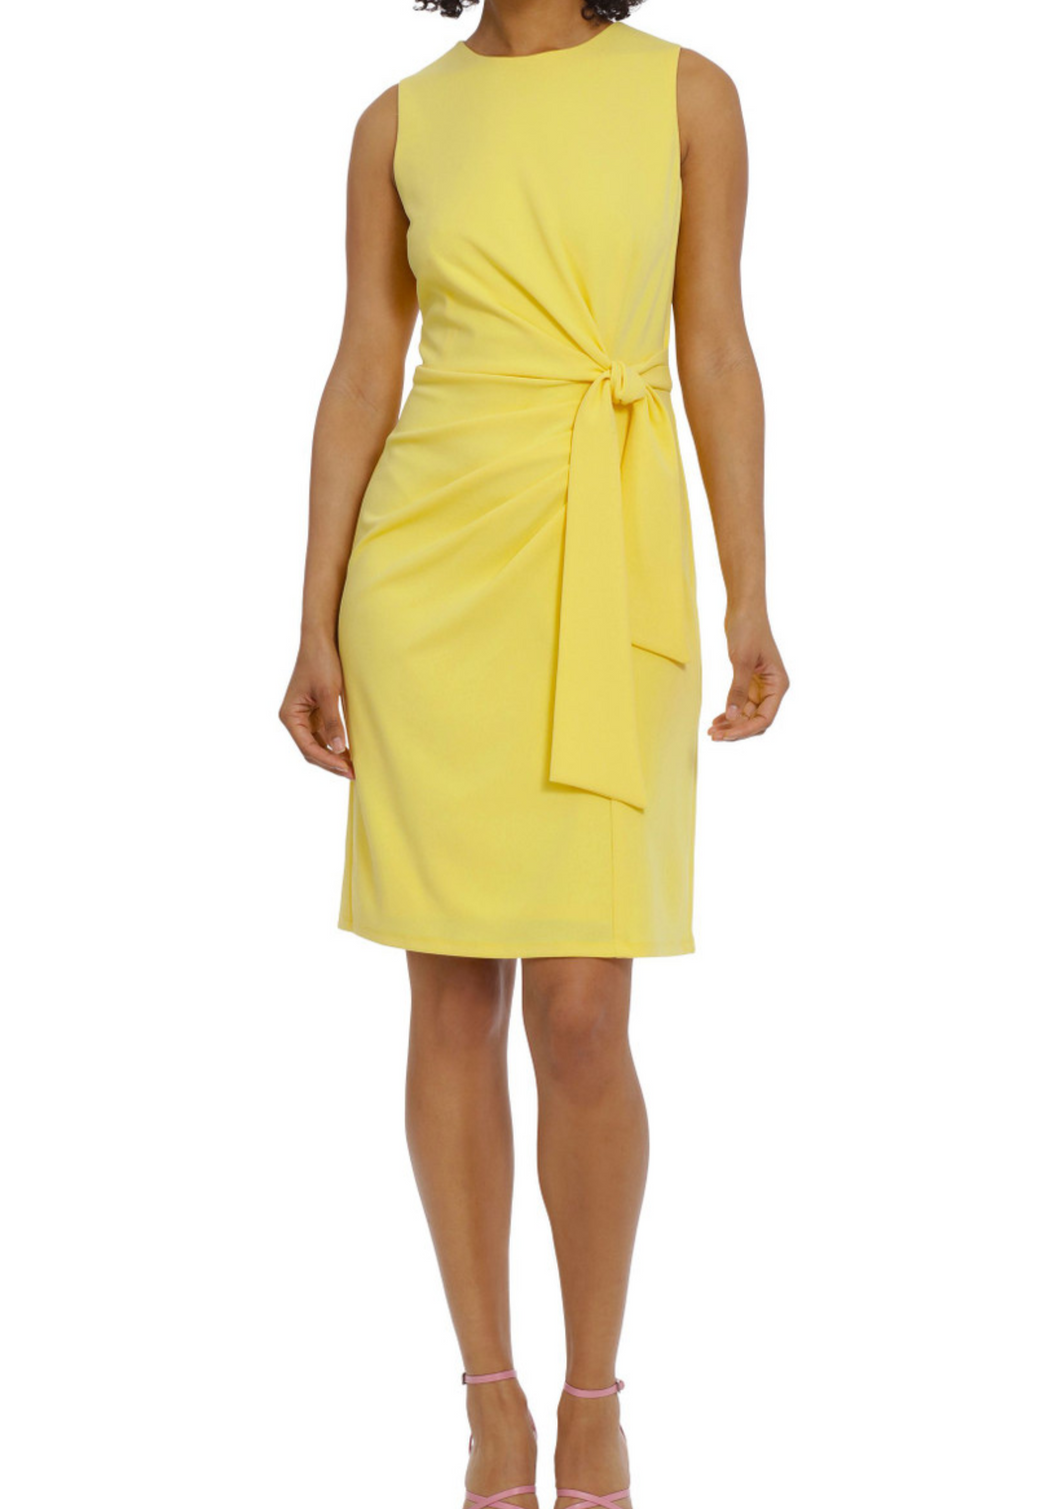 Maggy London Yellow Day Dress Sizes 6 & 14 Remaining